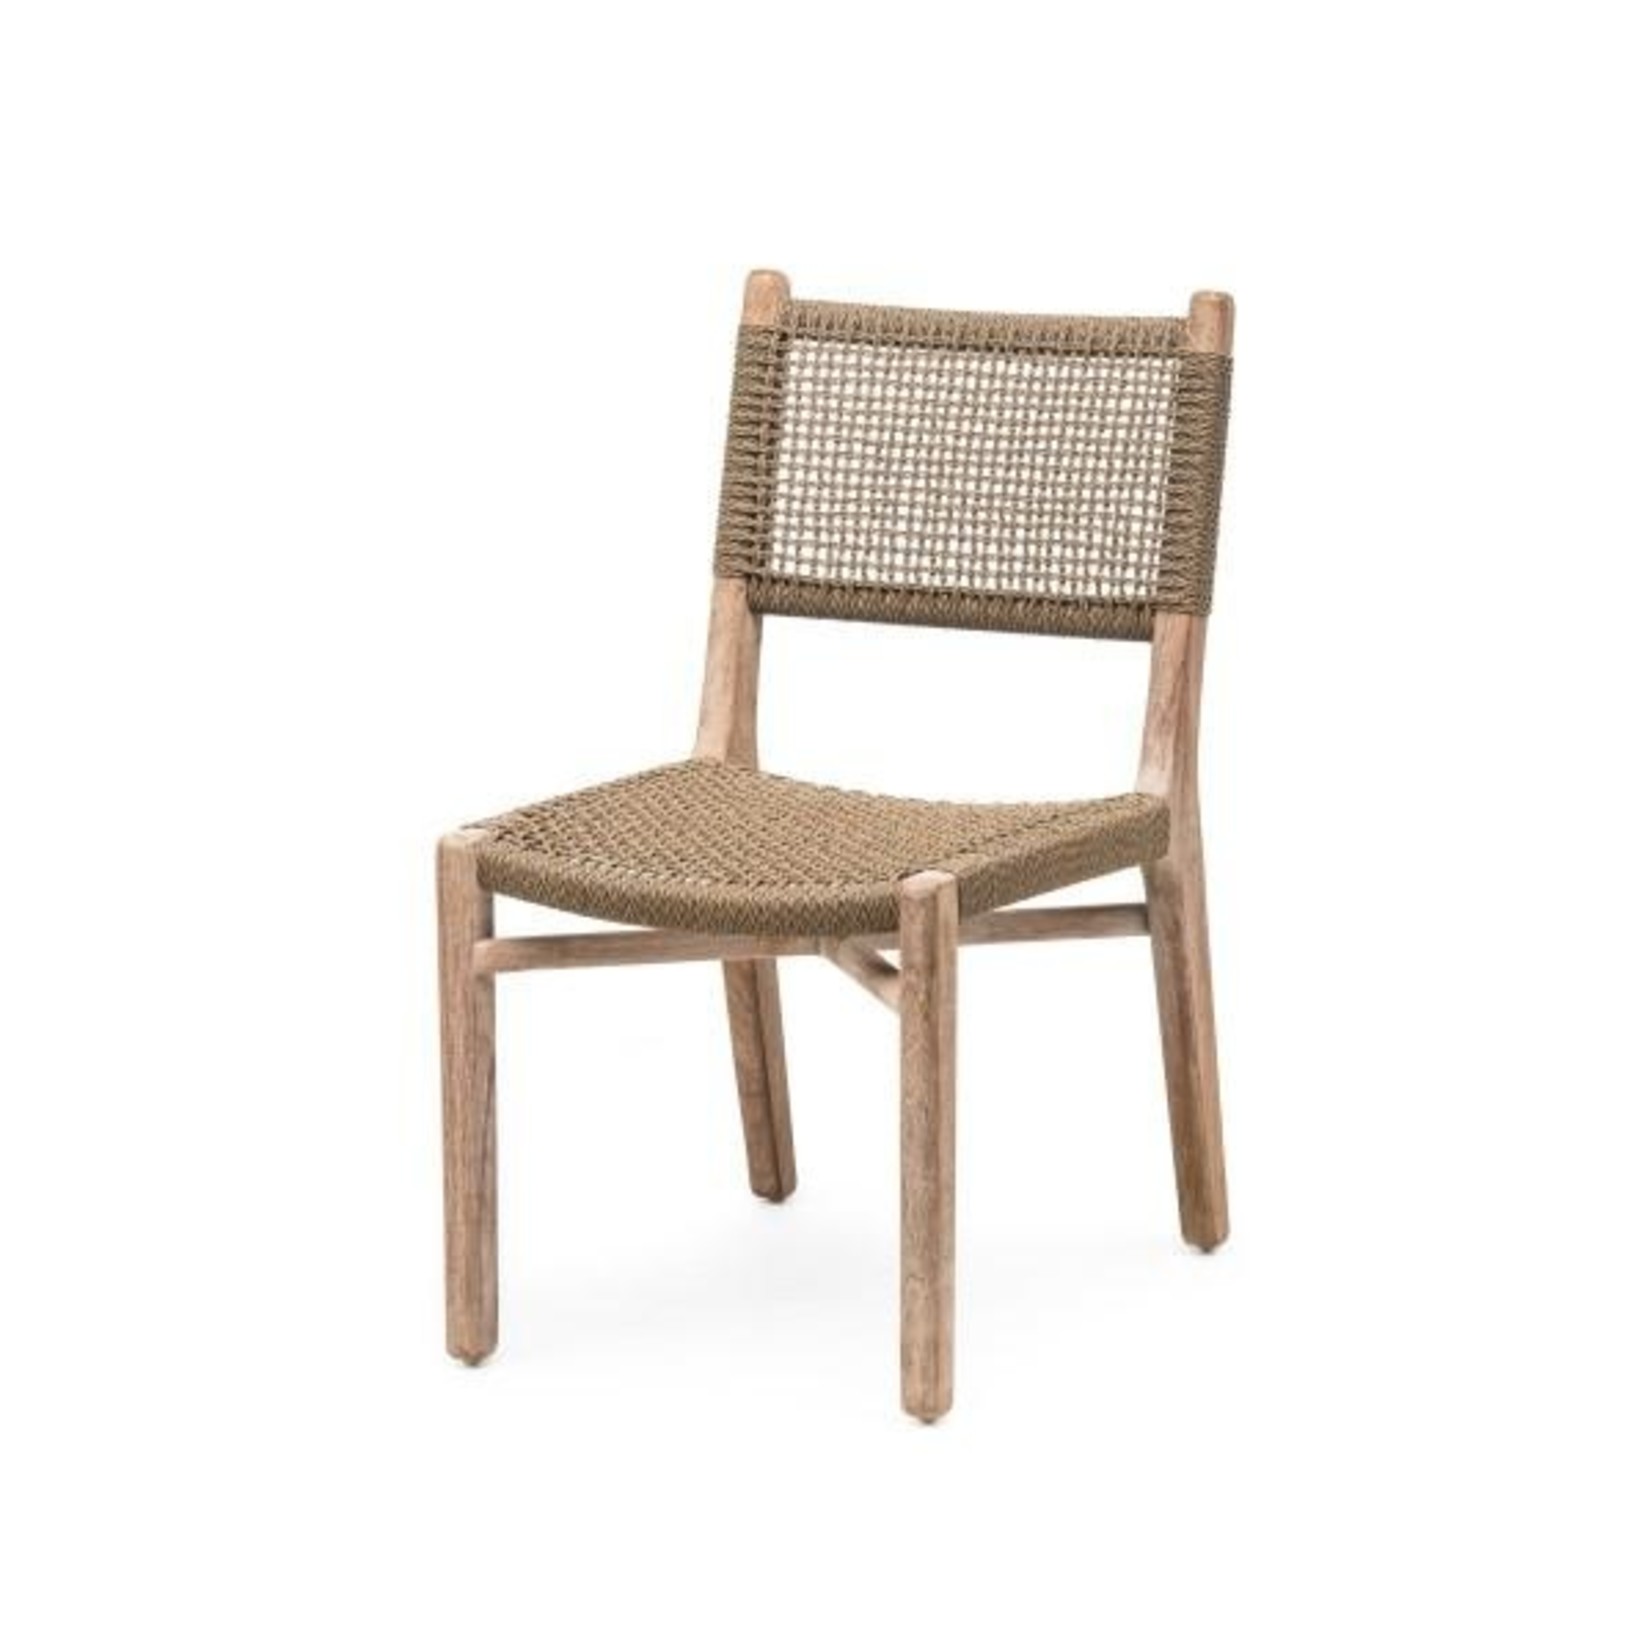 Gommaire Chair Fiona | Teak Natural Grey / PE Wicker Antique Weed